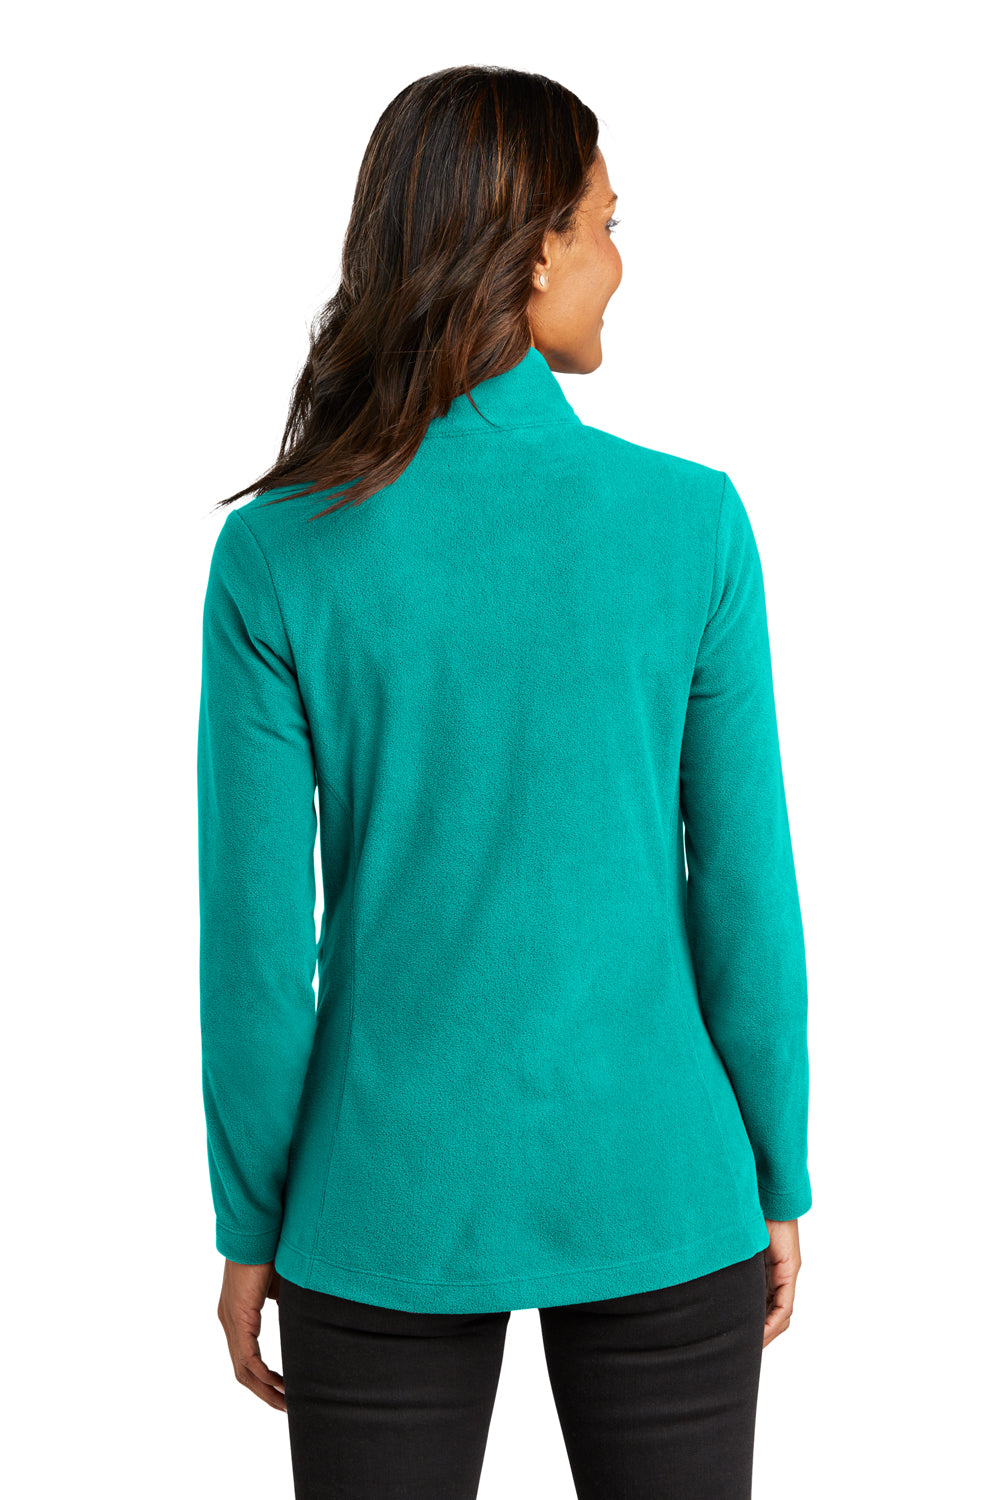 Port Authority L151 Womens Accord Microfleece Full Zip Jacket Teal Blue Back